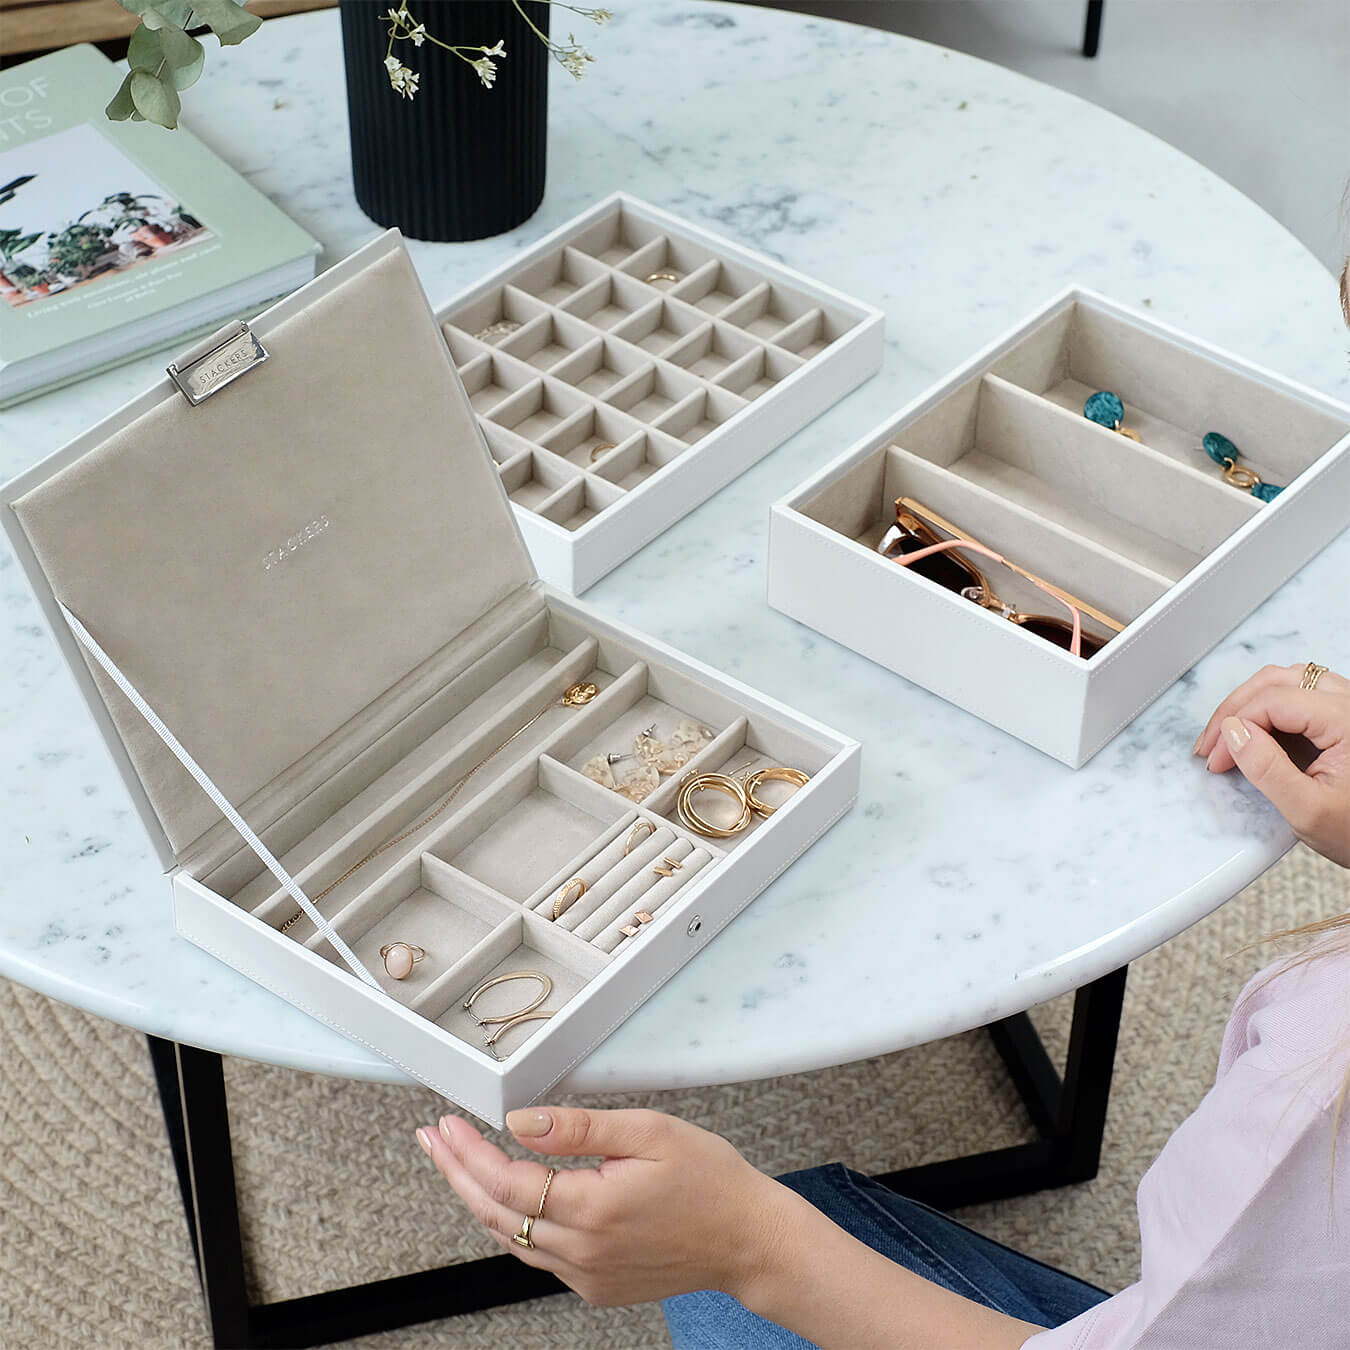 Create Your Own Jewellery Box - Stackers